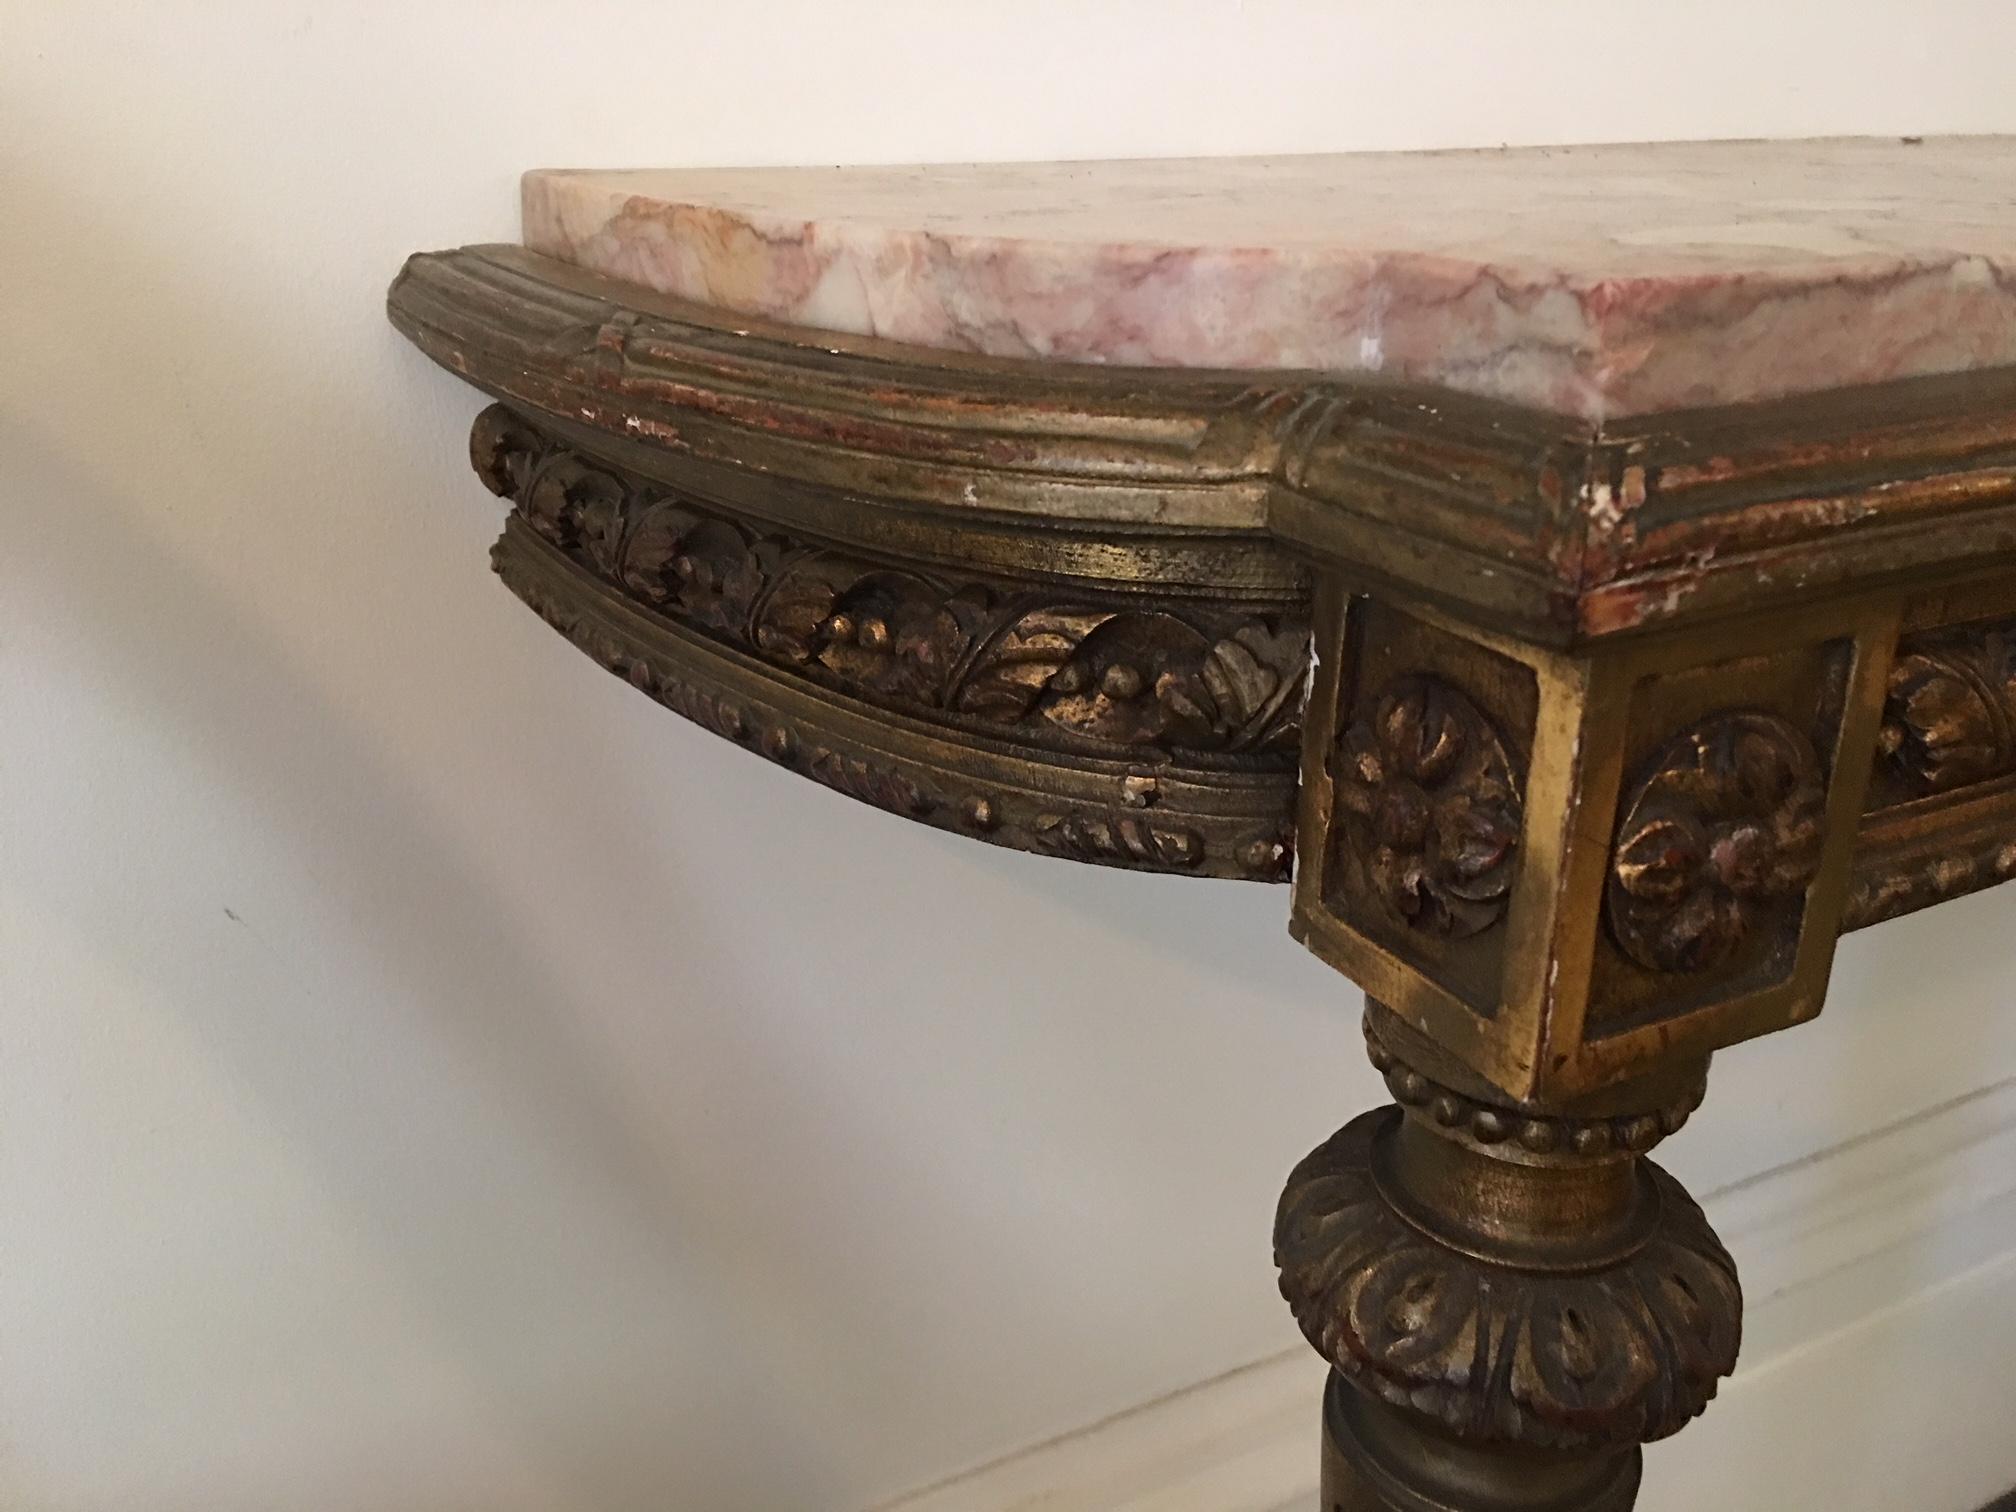 Louis XVI Gilded Console with a Marble Top, 19th Century (19. Jahrhundert)